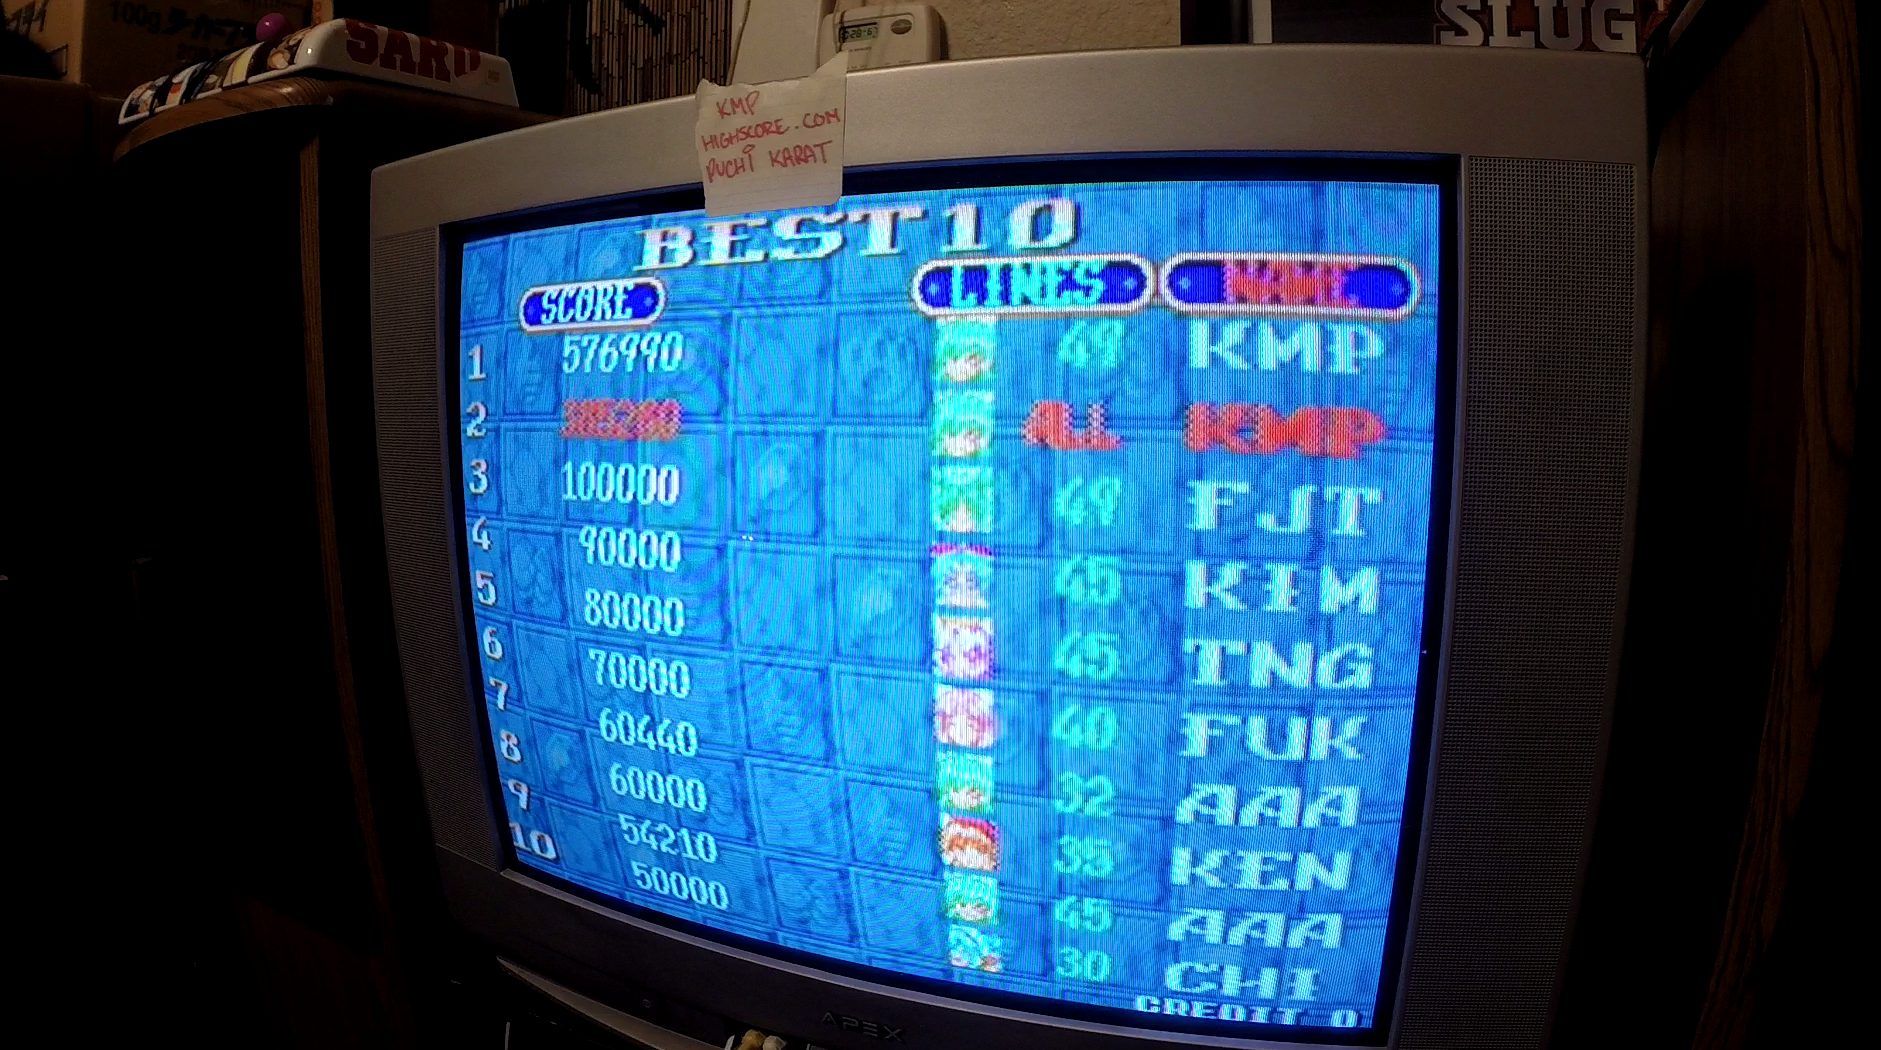 KMP: Taito Legends 2: Puchi Carat [Easy] (Playstation 2) 385,280 points on 2018-01-06 18:37:58